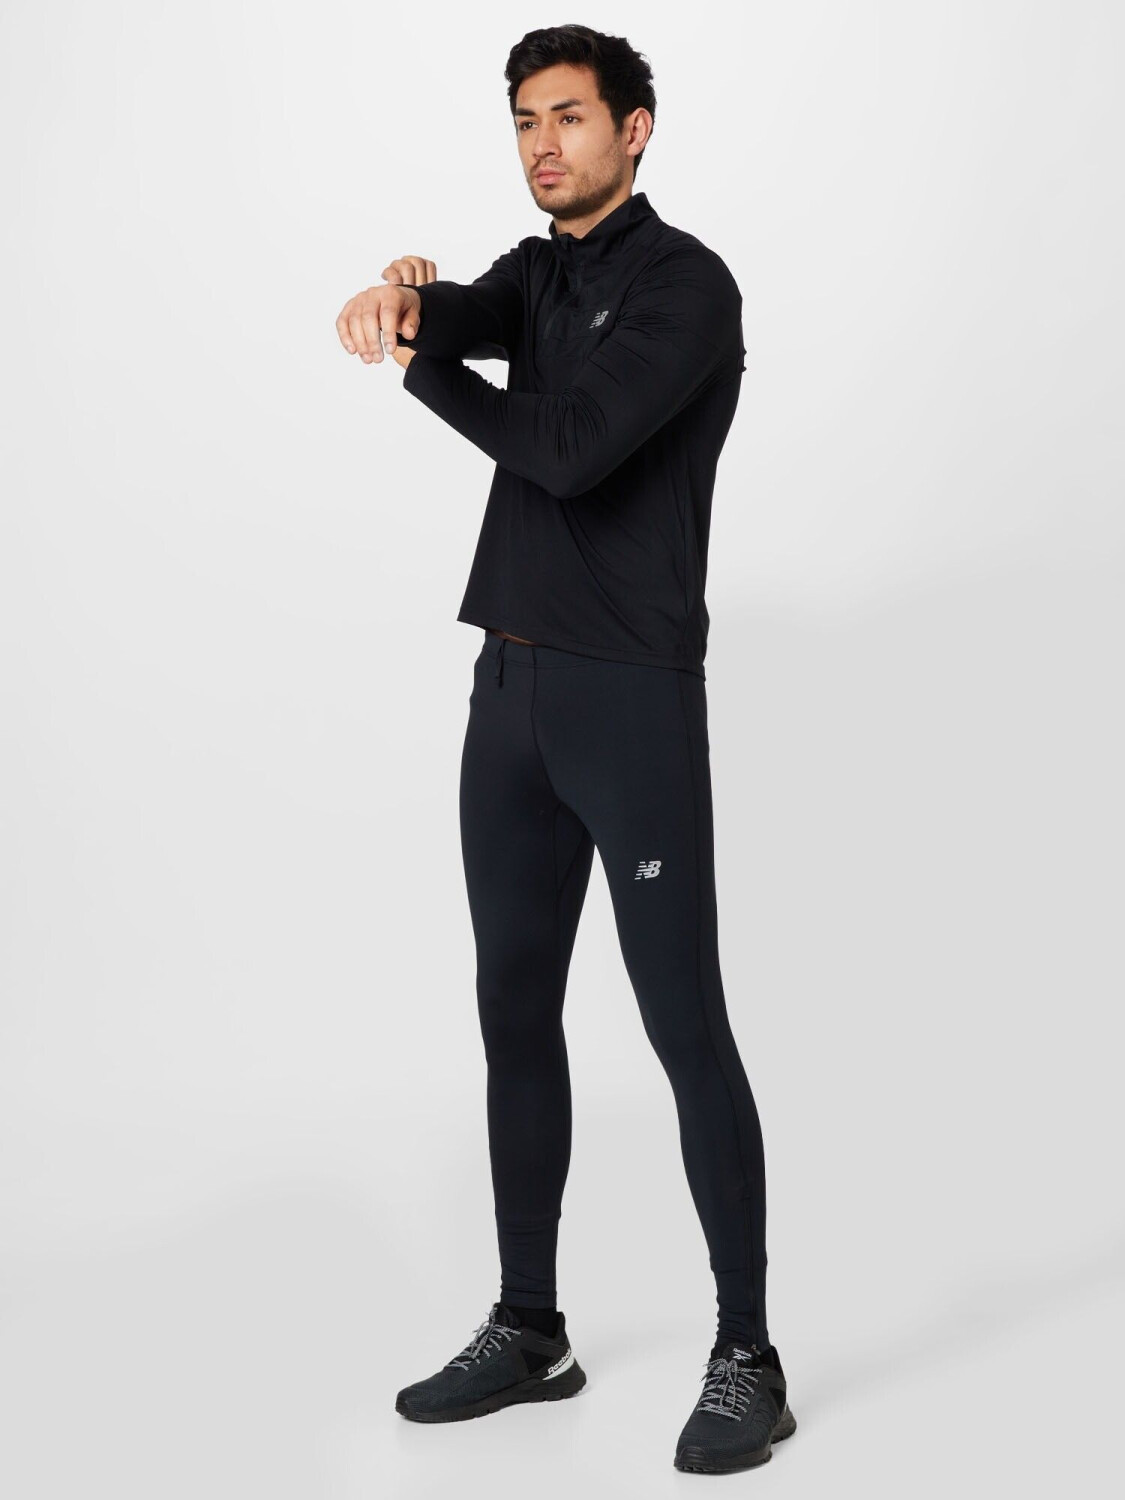 Buy New Balance Accelerate Leggings (MP23234) black from £25.77